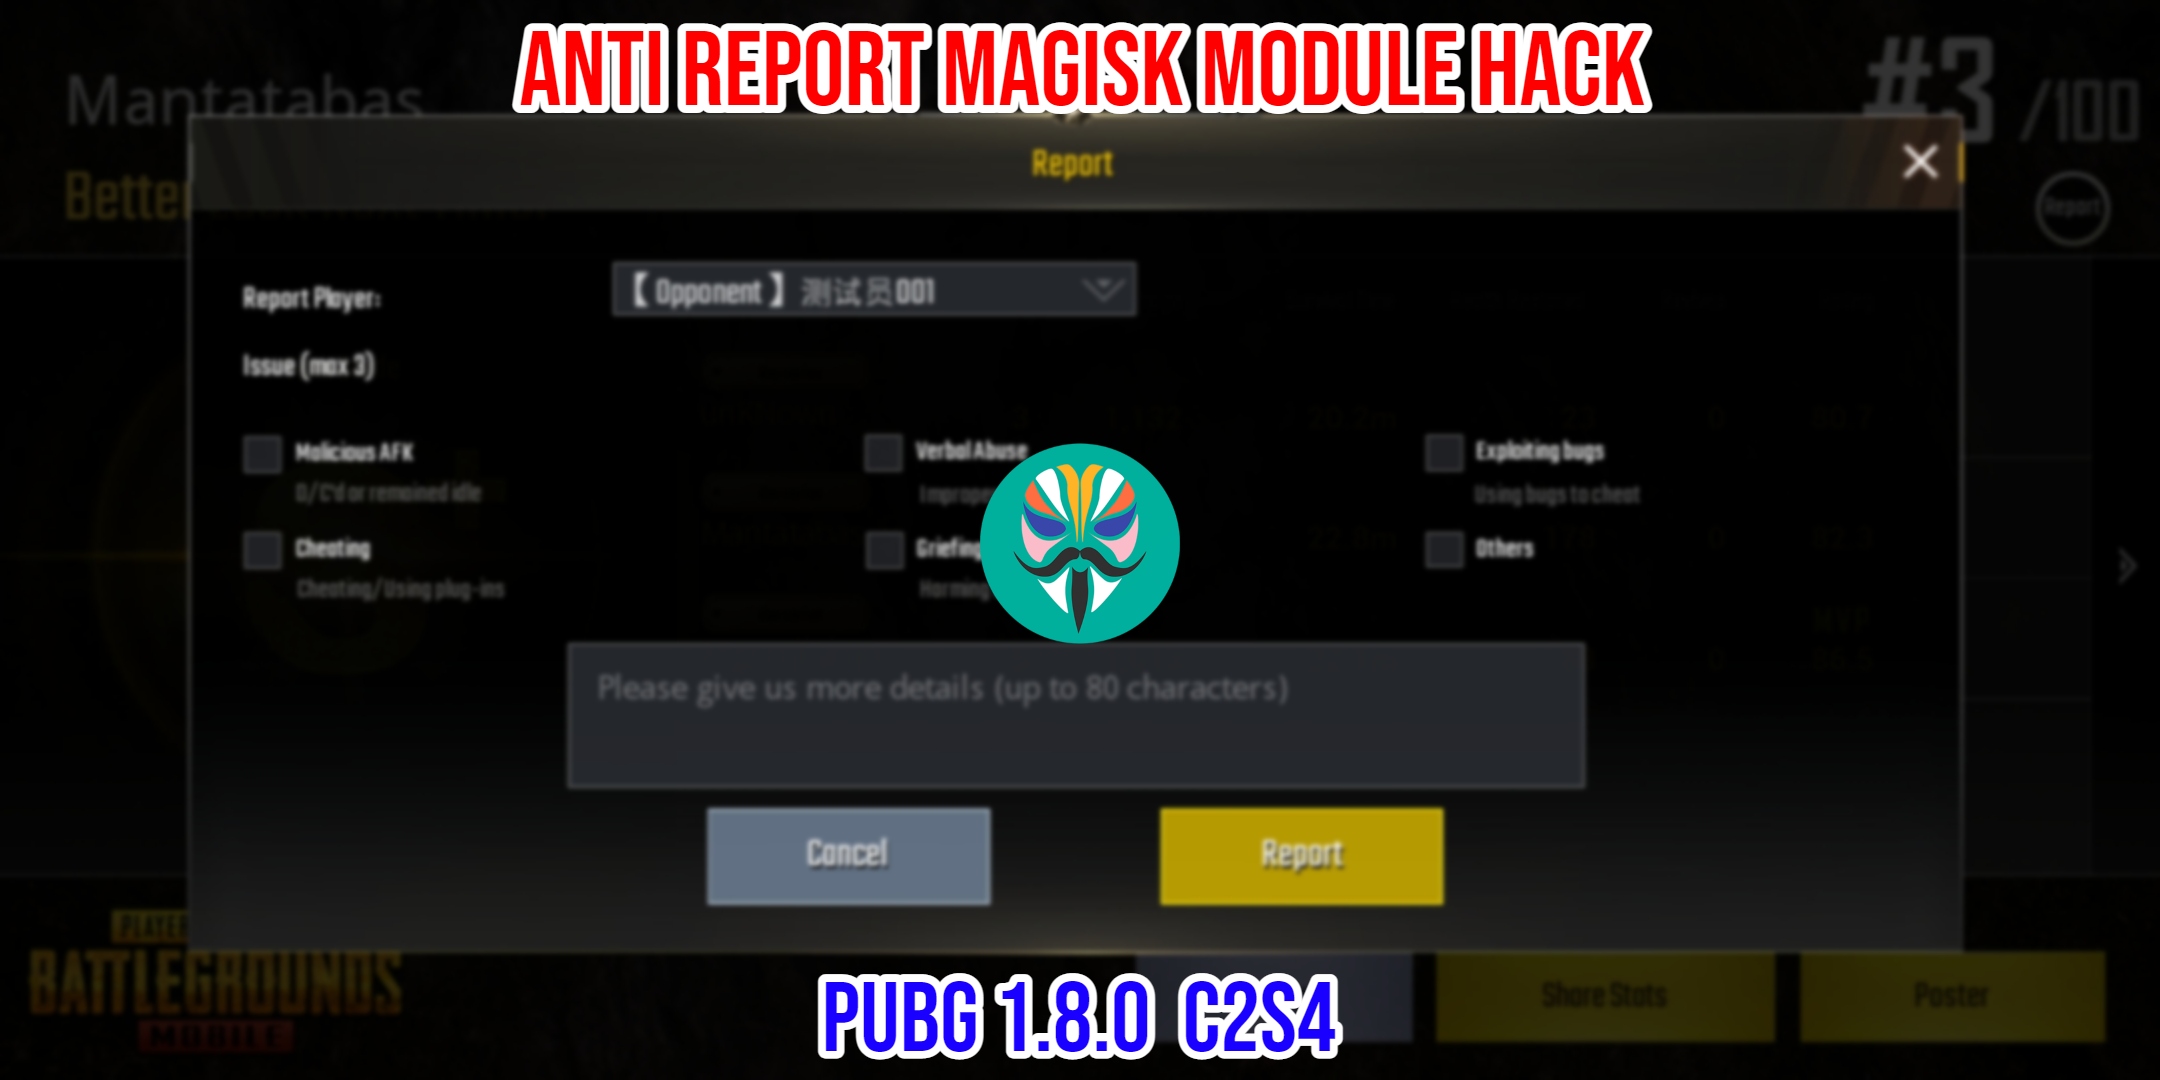 You are currently viewing PUBG 1.8.0 Anti Report Magisk Module Hack C2S4